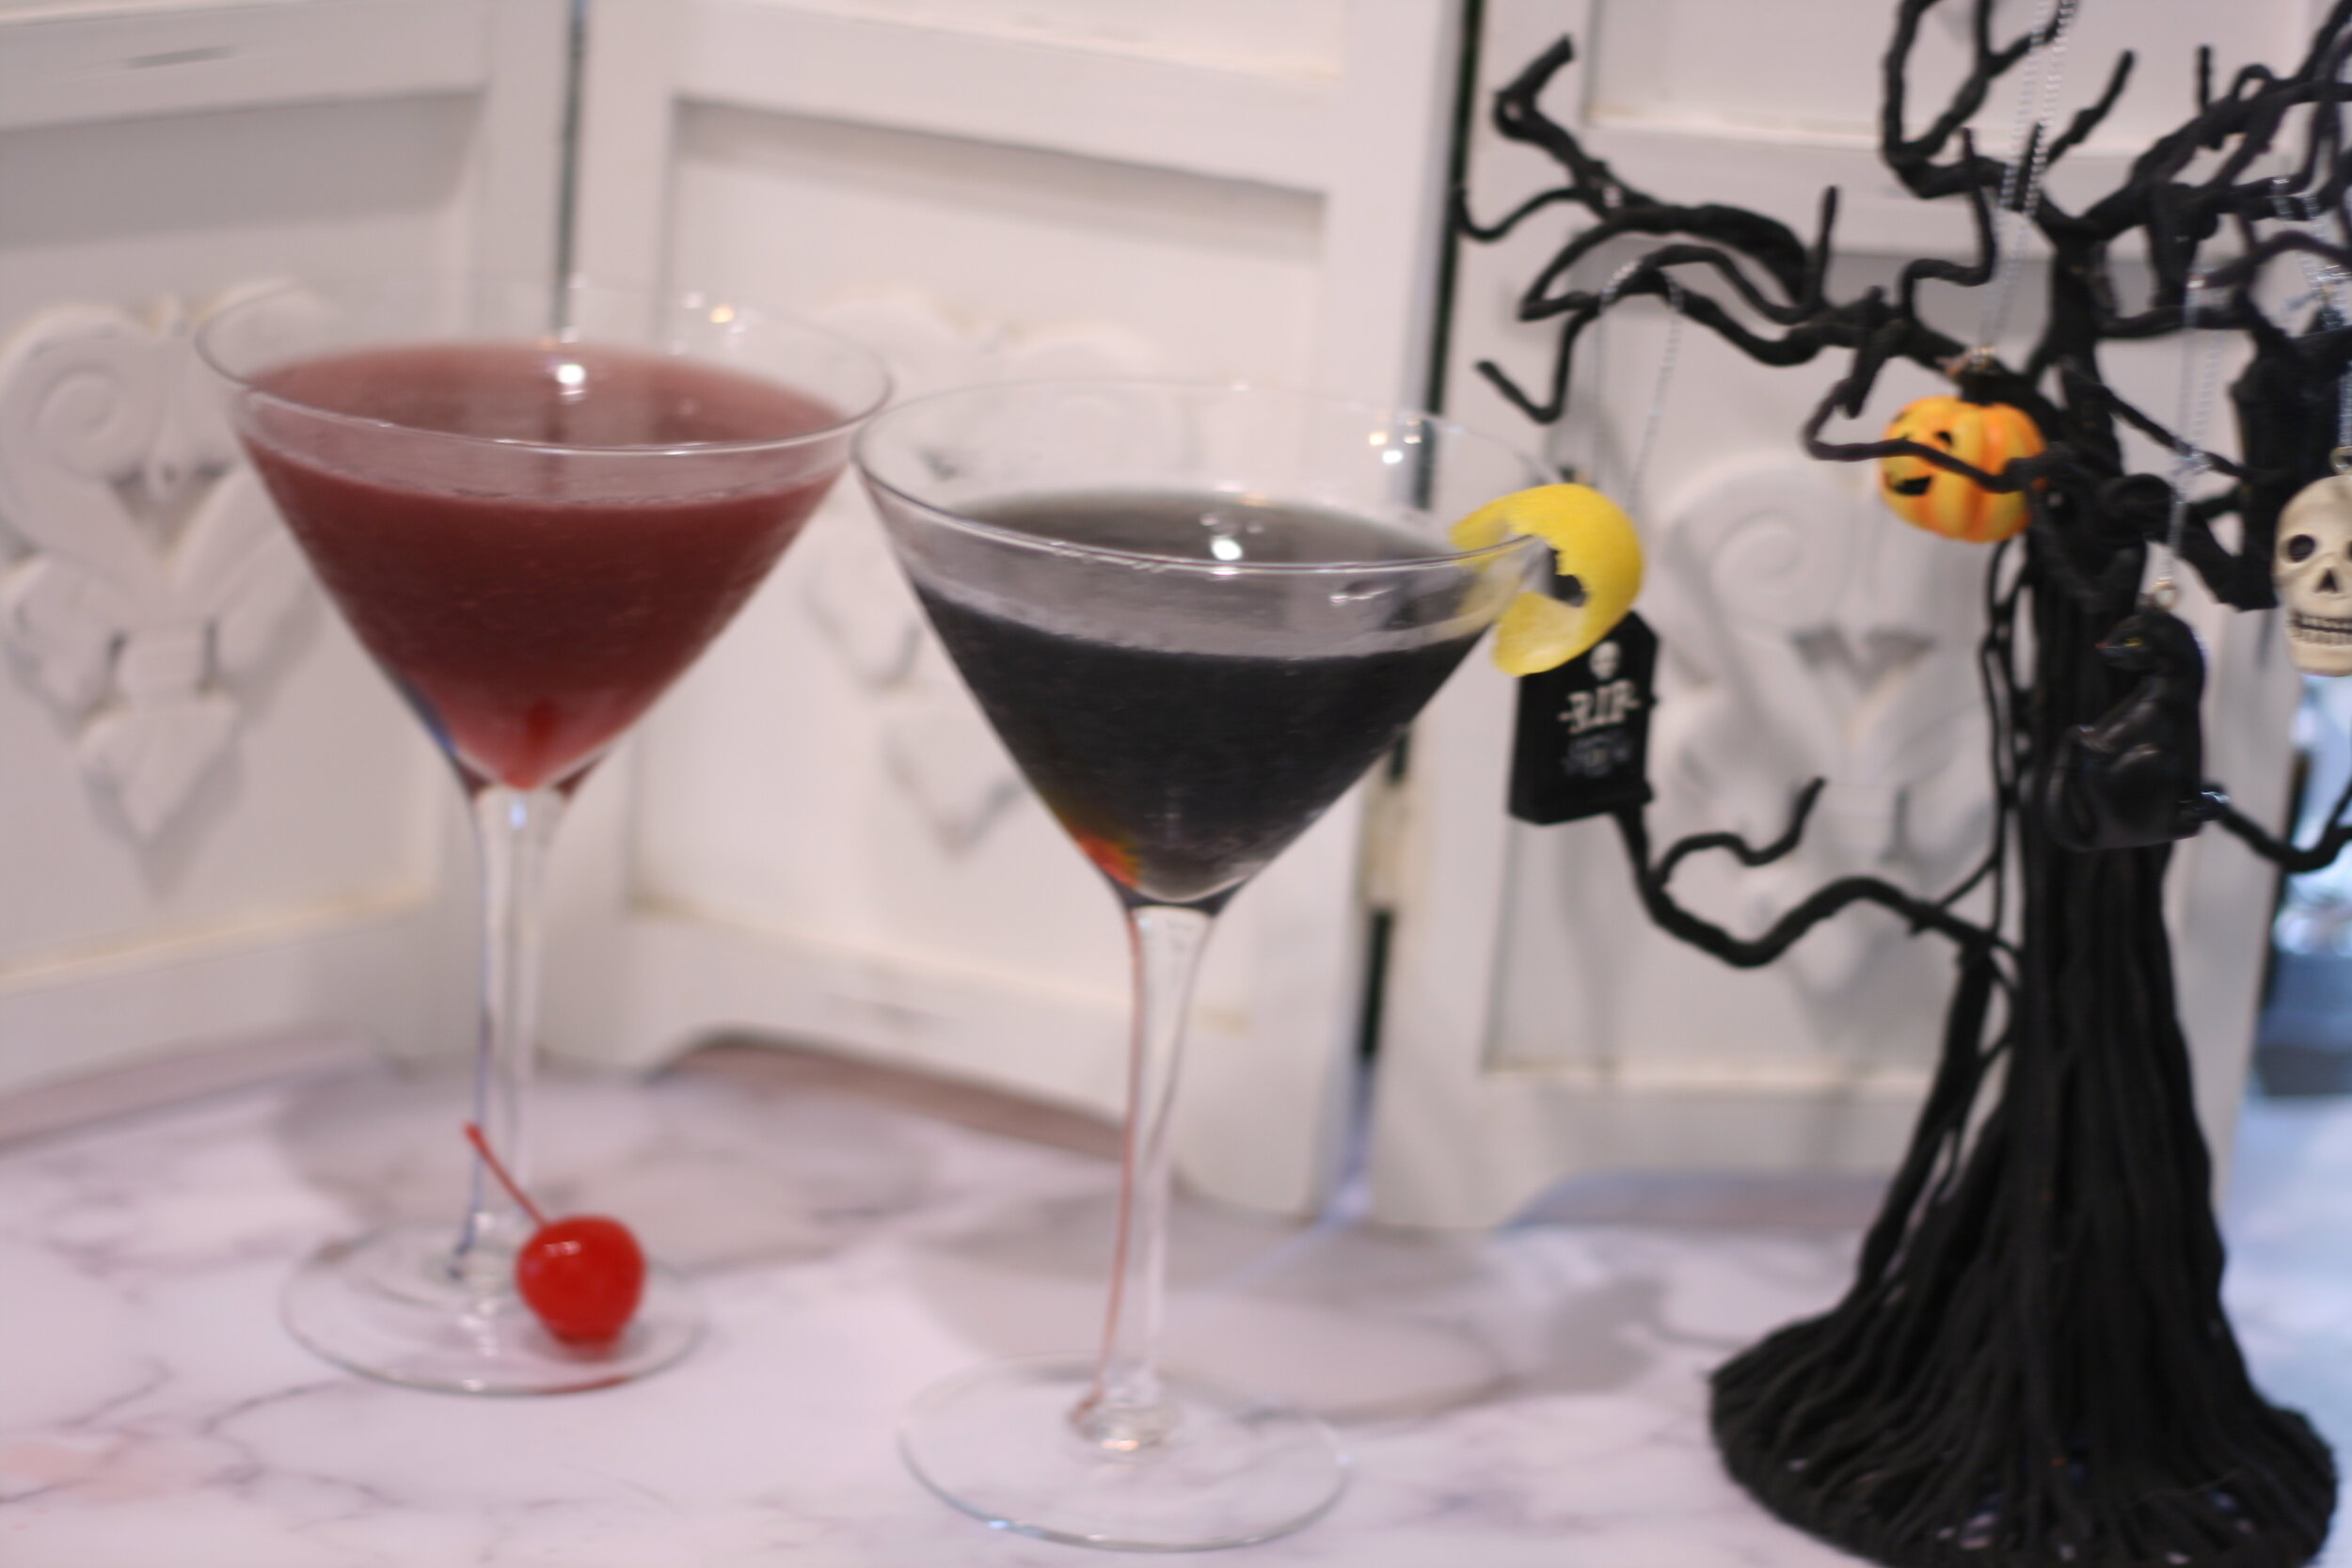 The Black Martini using just clear vodka in the glass on the left and black colored vodka in the glass on the right